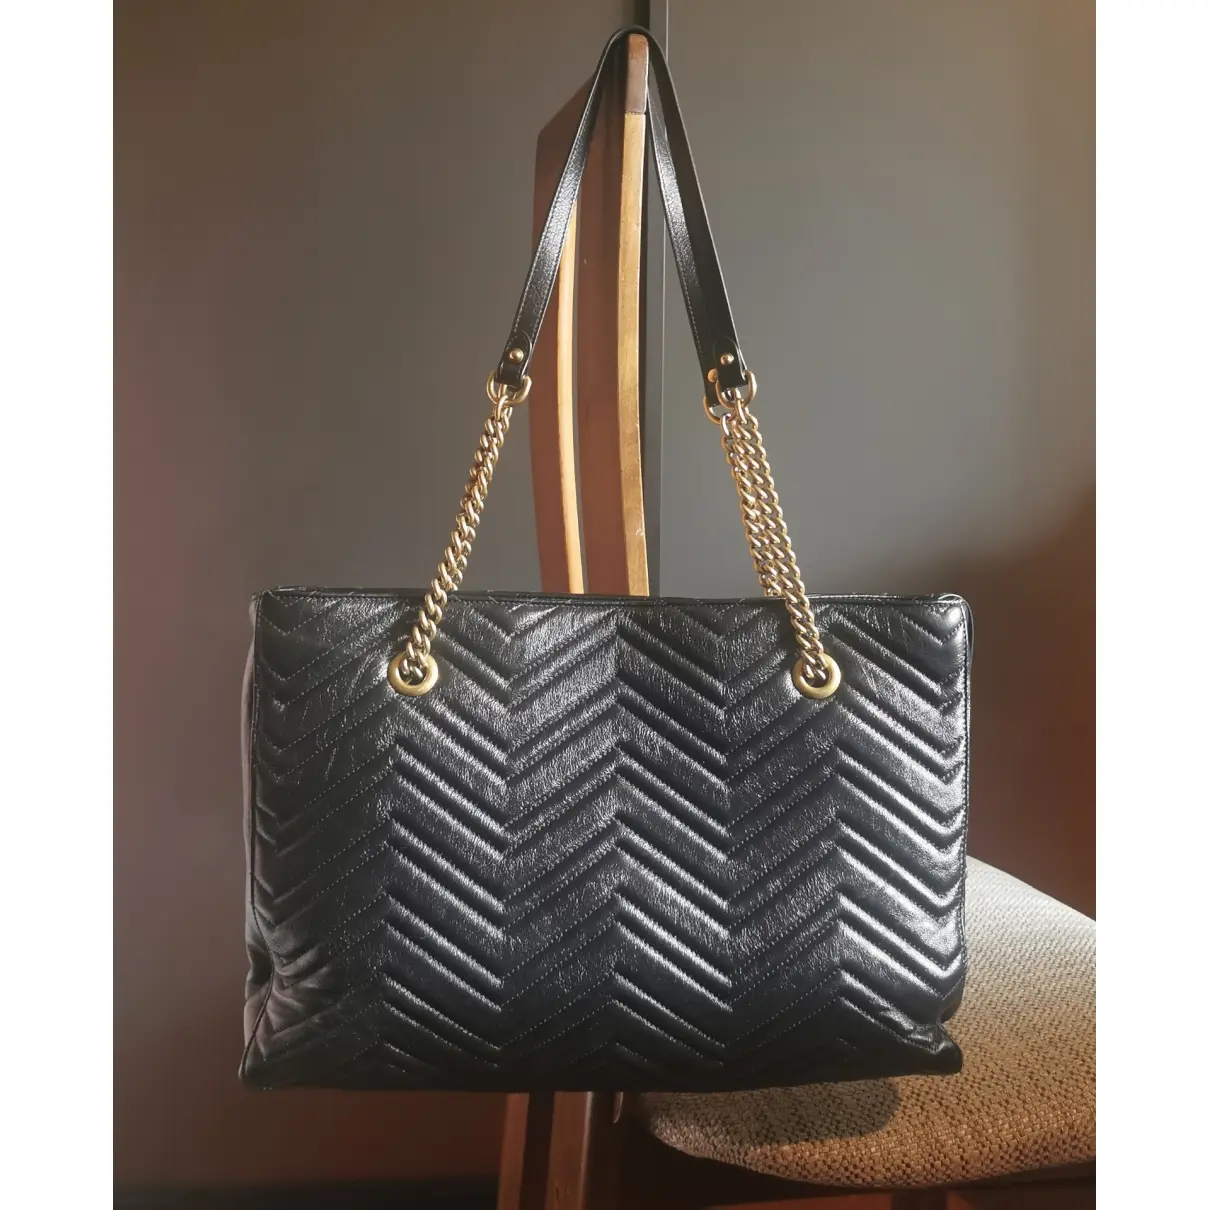 Buy Gucci GG Marmont Chain leather tote online